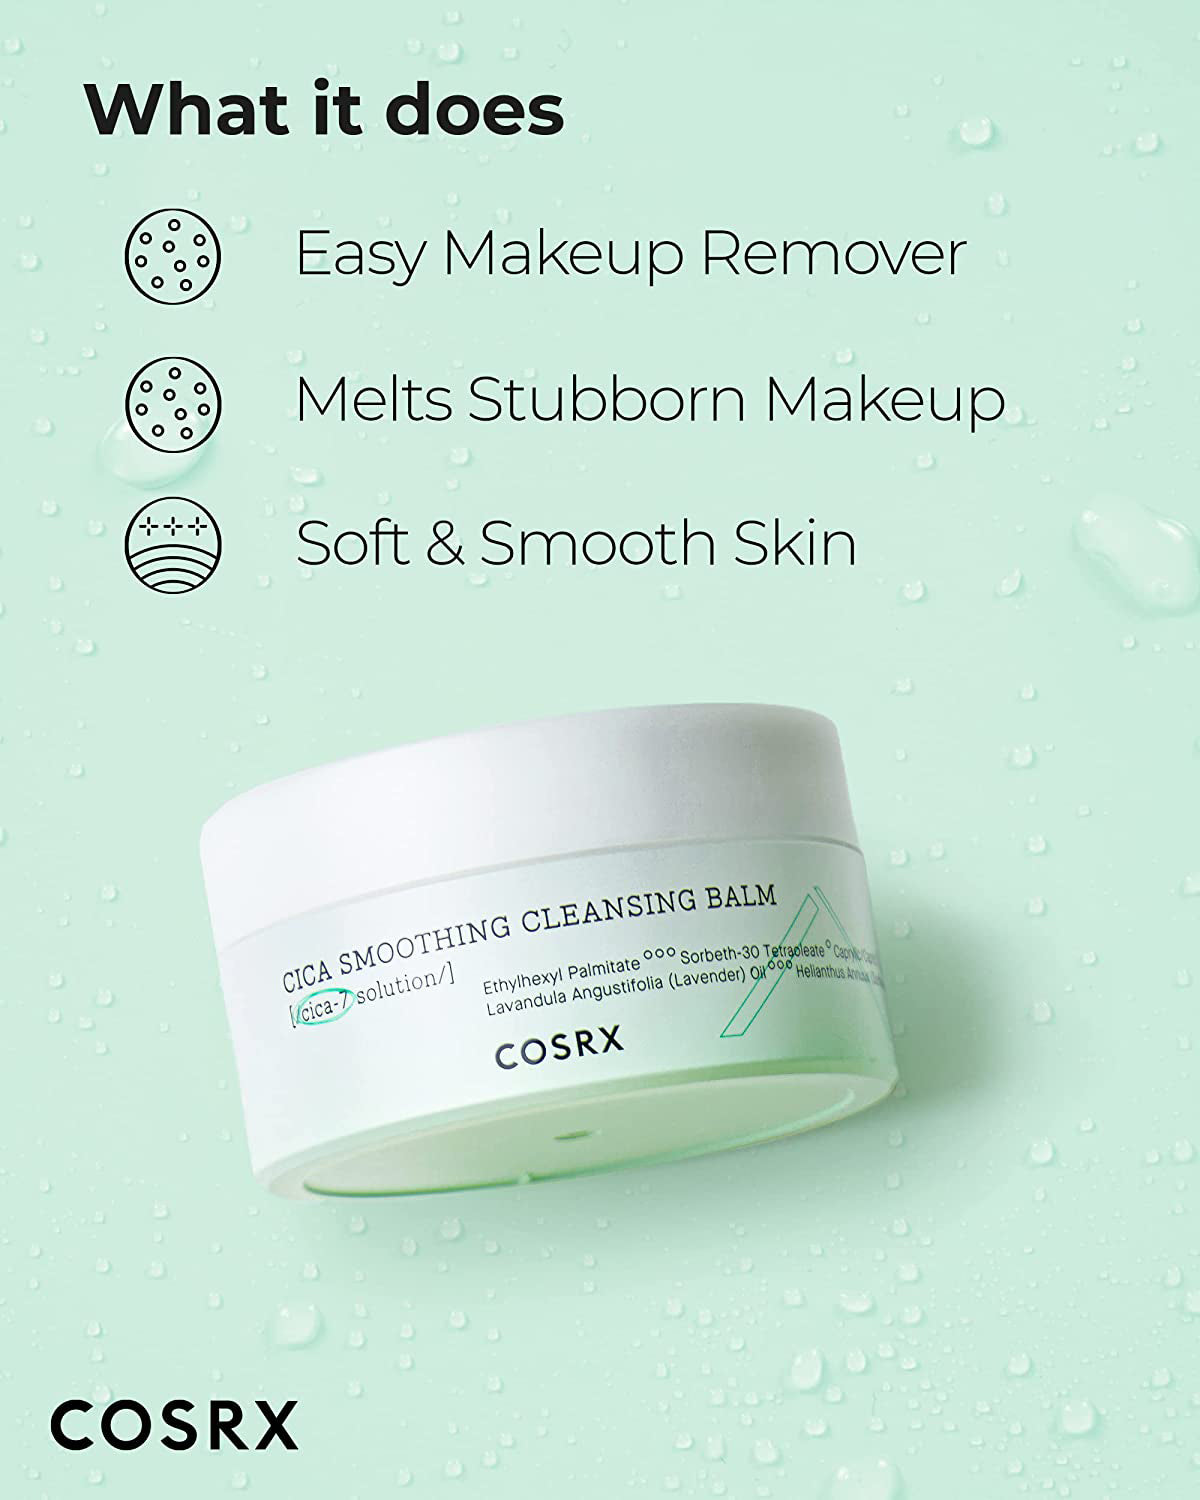 Cosrx Cica Smoothing Cleansing Balm Beauty Cosrx   